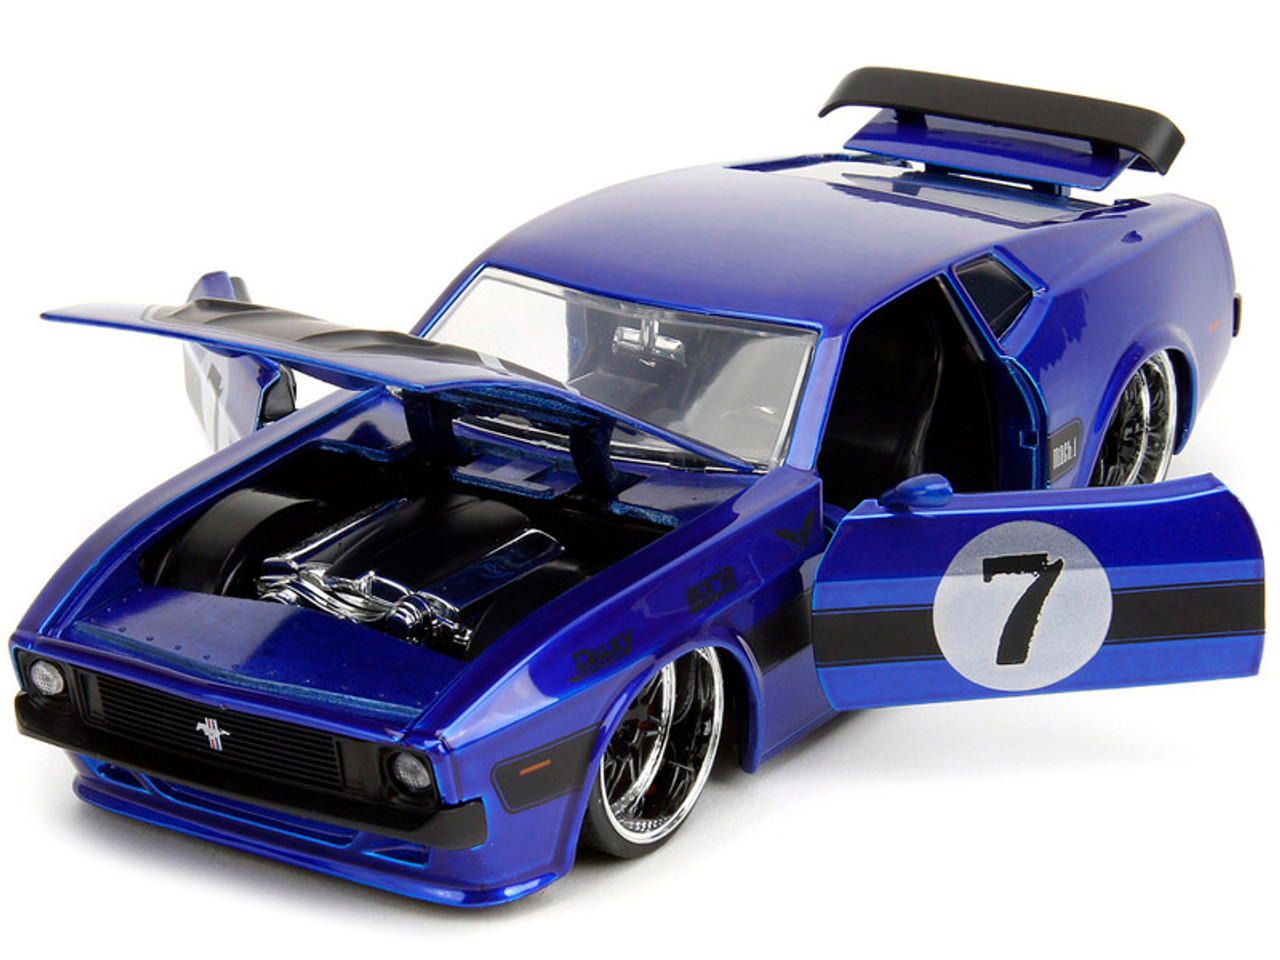 1973 Ford Mustang Mach 1 #7 Candy Blue Metallic with Black Stripes and Hood "Bigtime Muscle" Series 1/24 Diecast Model Car by Jada